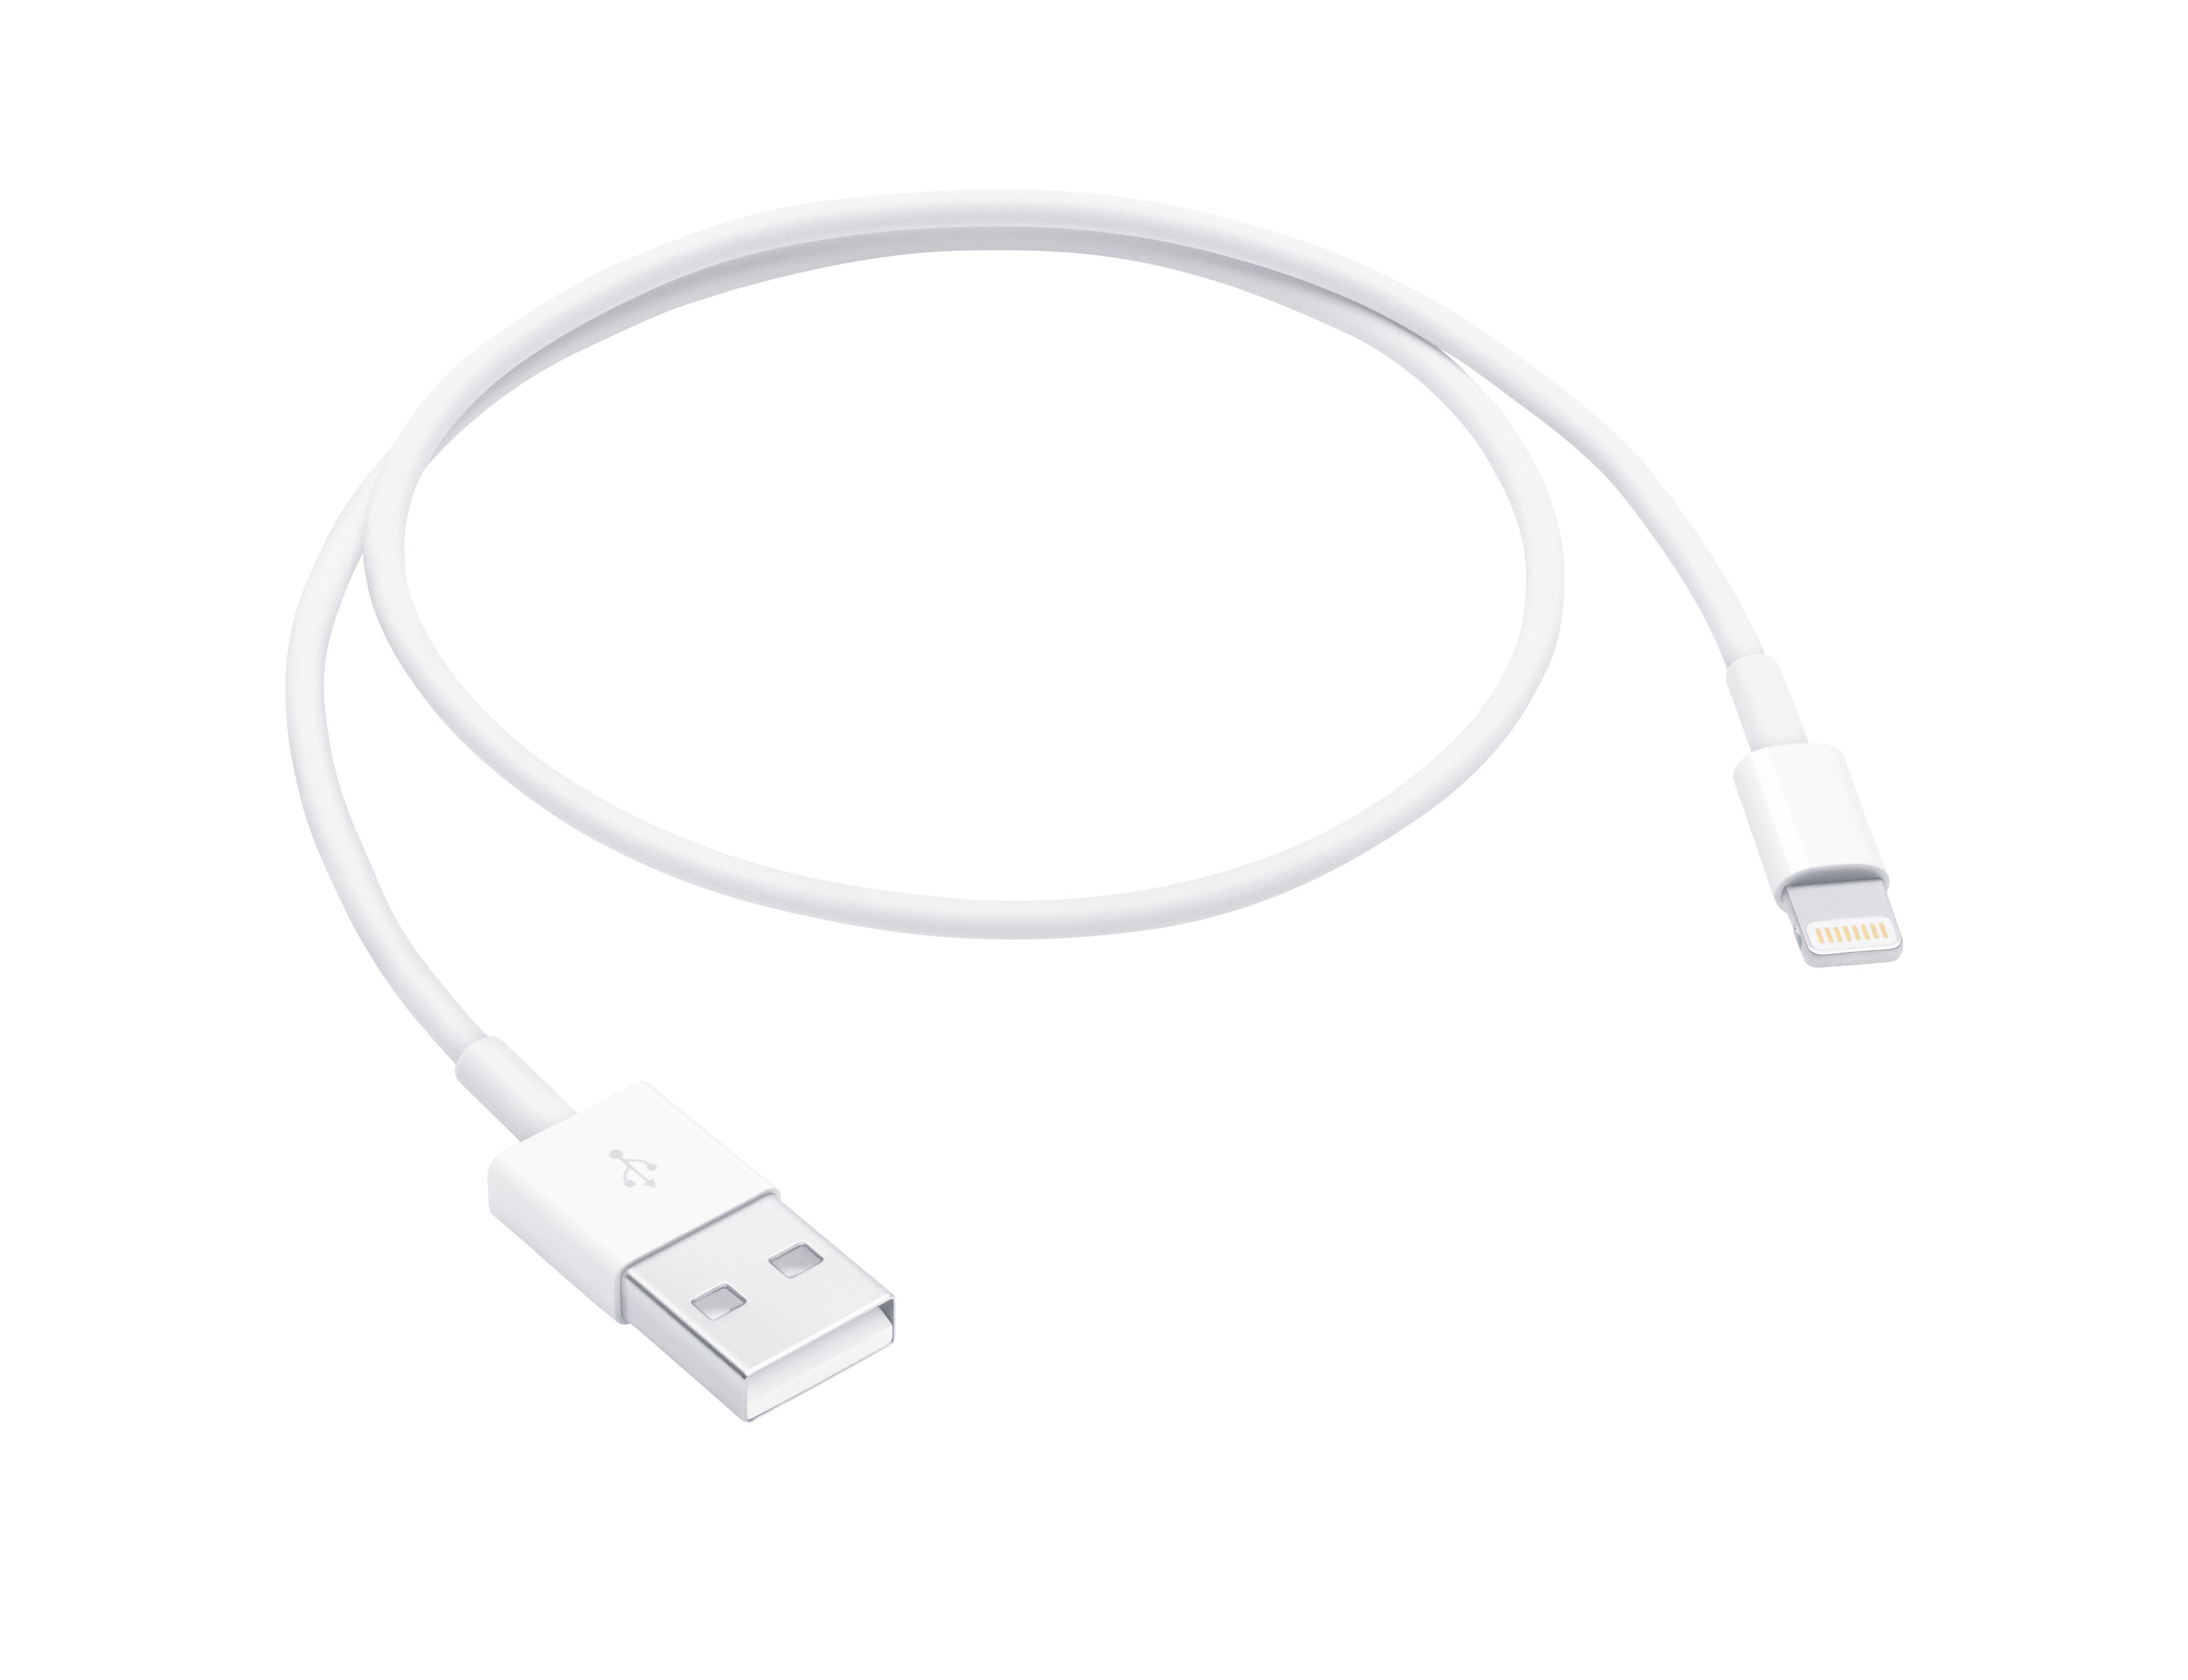 USB-A to Lightning Cable Cord, For Apple iPhone, iPad, Airpods